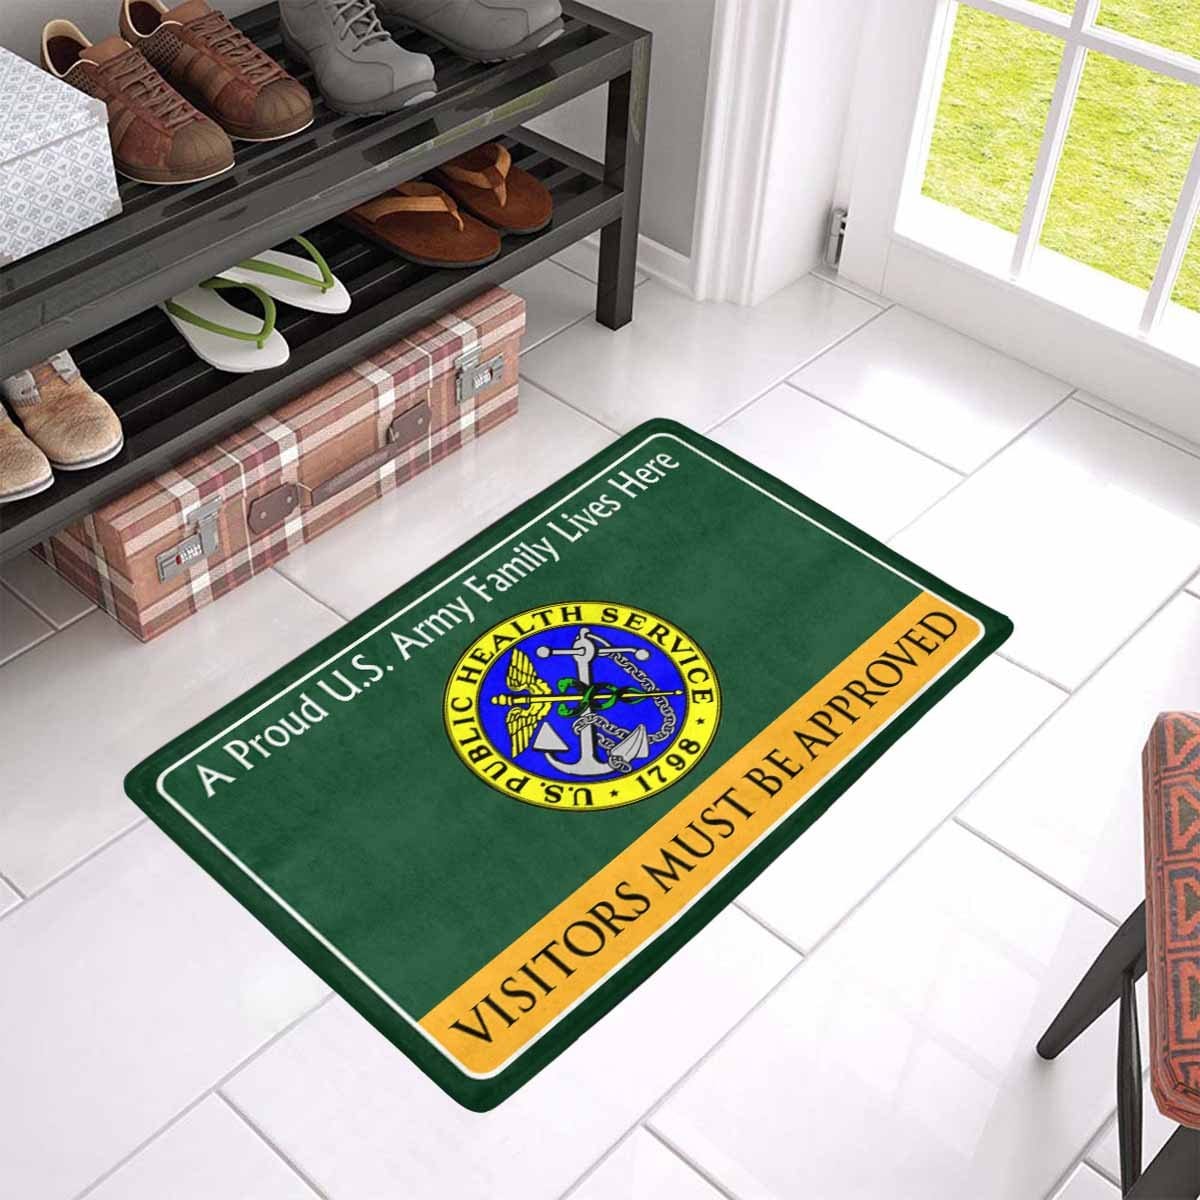 US Army Public Health Service Family Doormat - Visitors must be approved Doormat (23.6 inches x 15.7 inches)-Doormat-Army-Branch-Veterans Nation